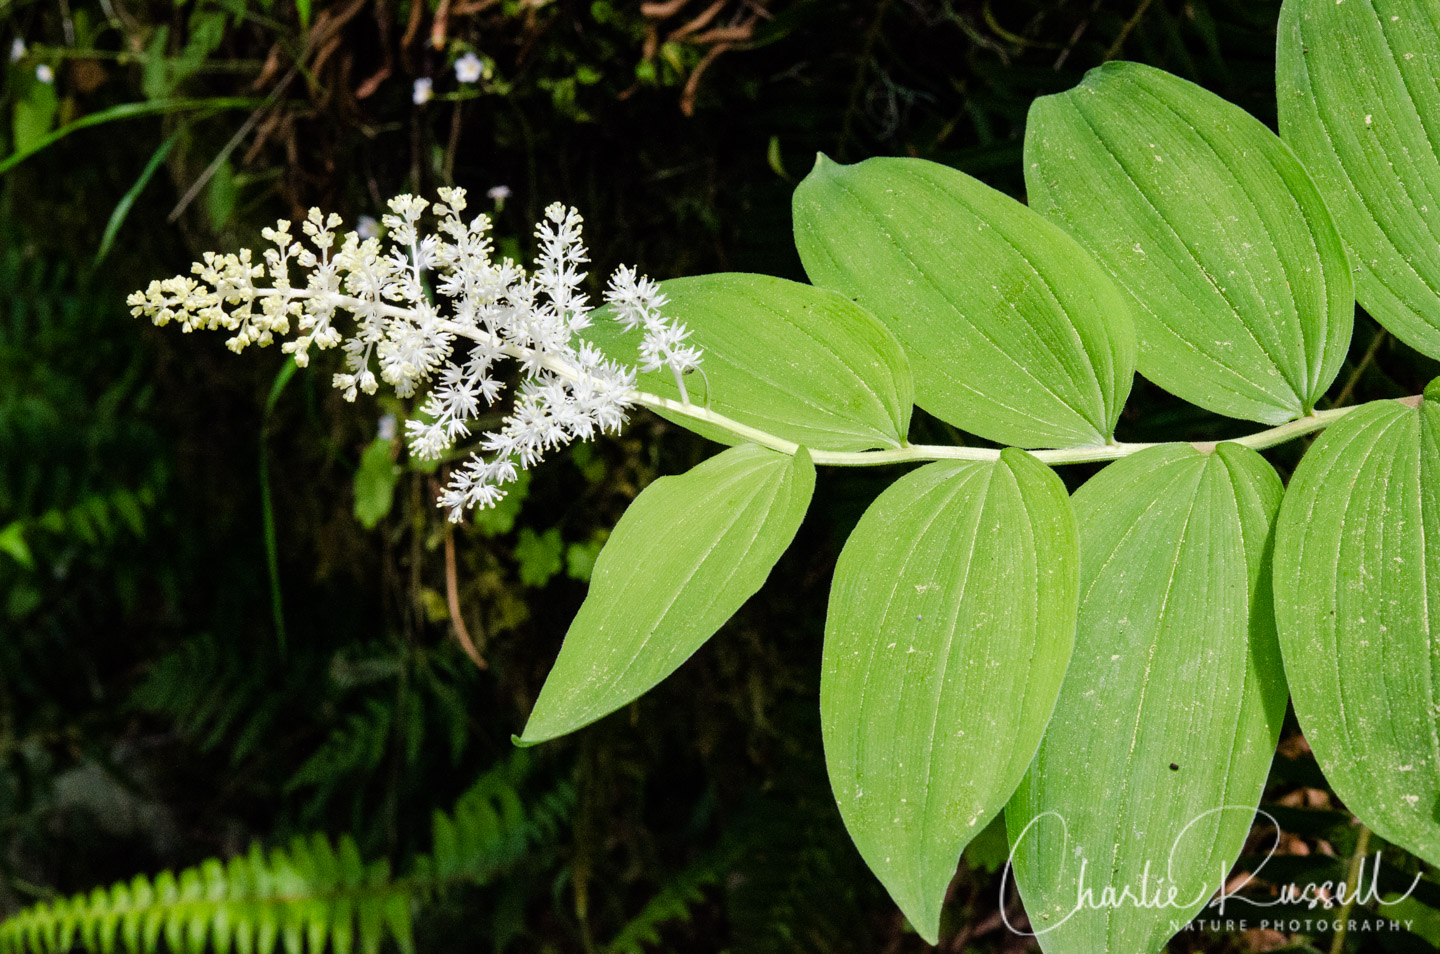 Feathery false lily of the valley, Maianthemum racemosum